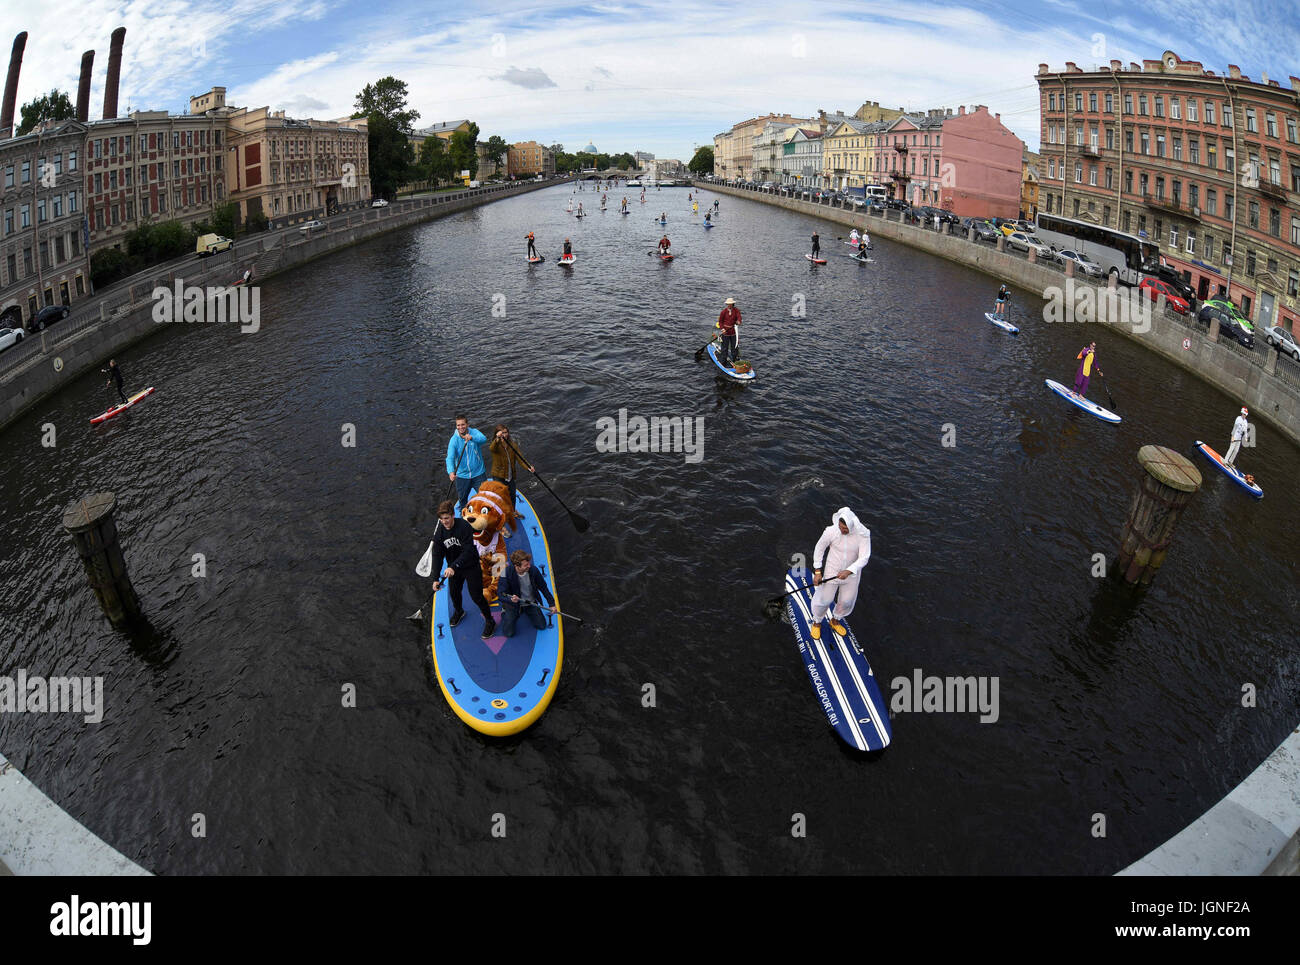 St. Petersburg, Russia. 8th July, 2017. Russia, St. Petersburg, on July 8, 2017. St. Petersburg International sea festival 2017. Participants of a festival of SUP surfing on the Fontanka River, during the fancy-dress race on surfboards. More than 300 athletes and fans of driving on boards with an oar have participated in a festival. Total length of a distance will make about 10 kilometers. Credit: Andrey Pronin/ZUMA Wire/Alamy Live News Stock Photo